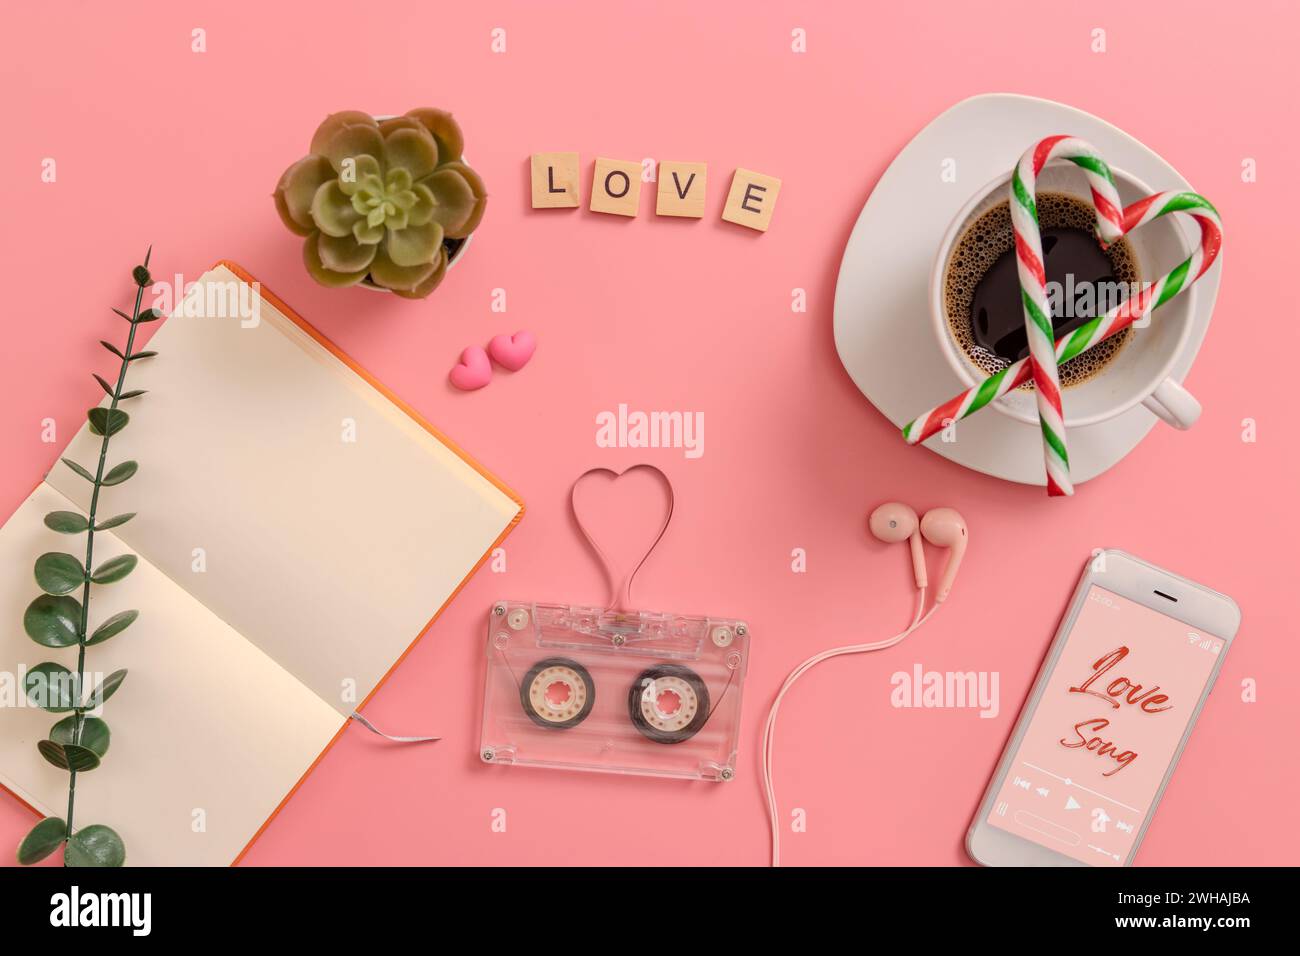 vintage transparent audio cassette magnetic tape in shape of heart, open blank book page, candy cane in the shape of heart on coffee cup, earphones, c Stock Photo